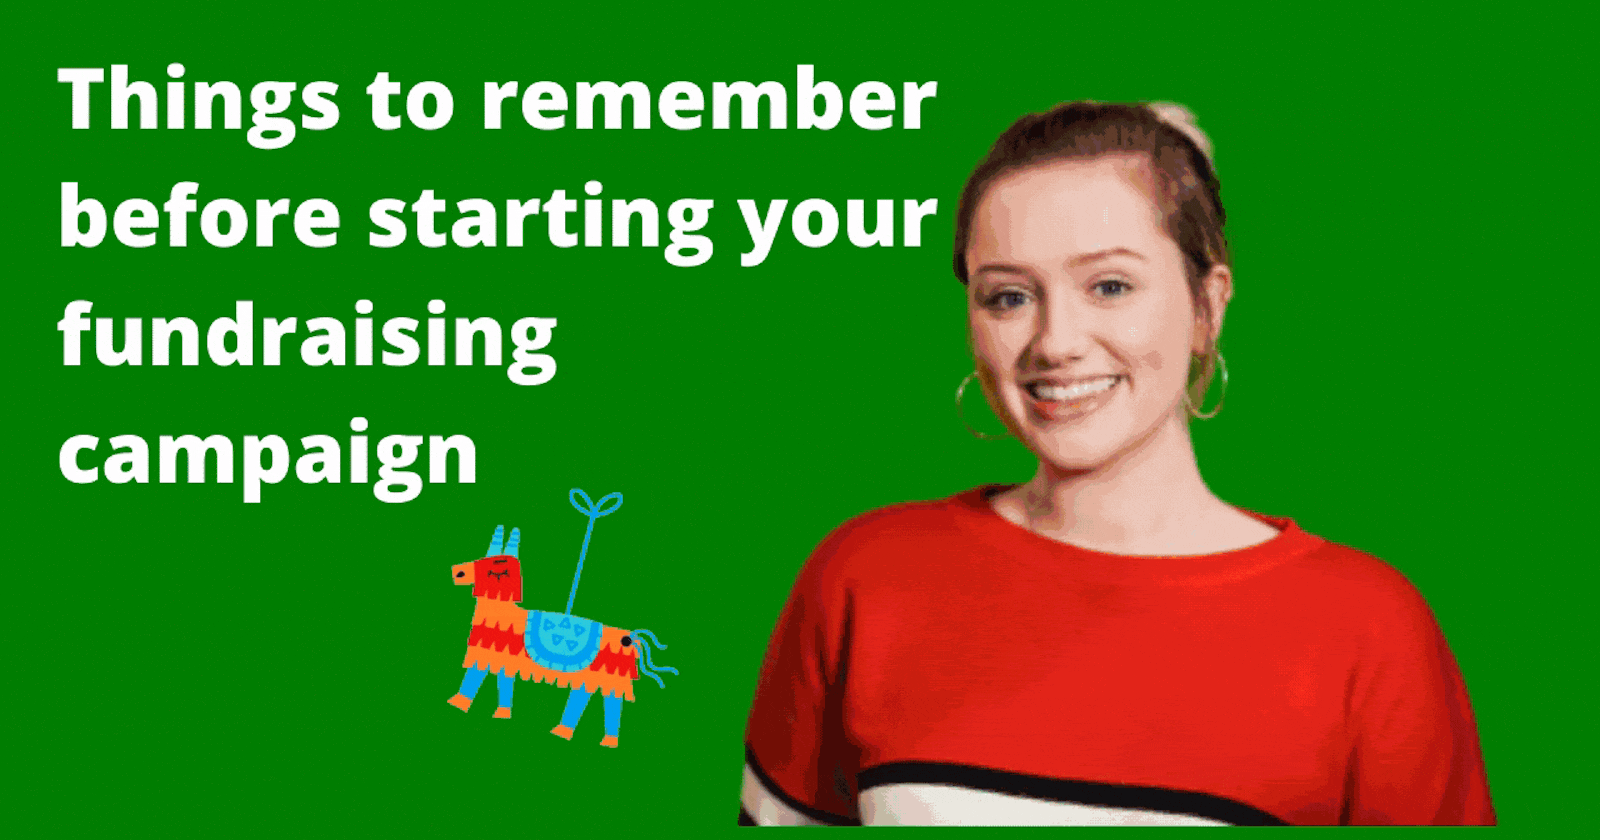 Things to remember before starting your fundraising campaign